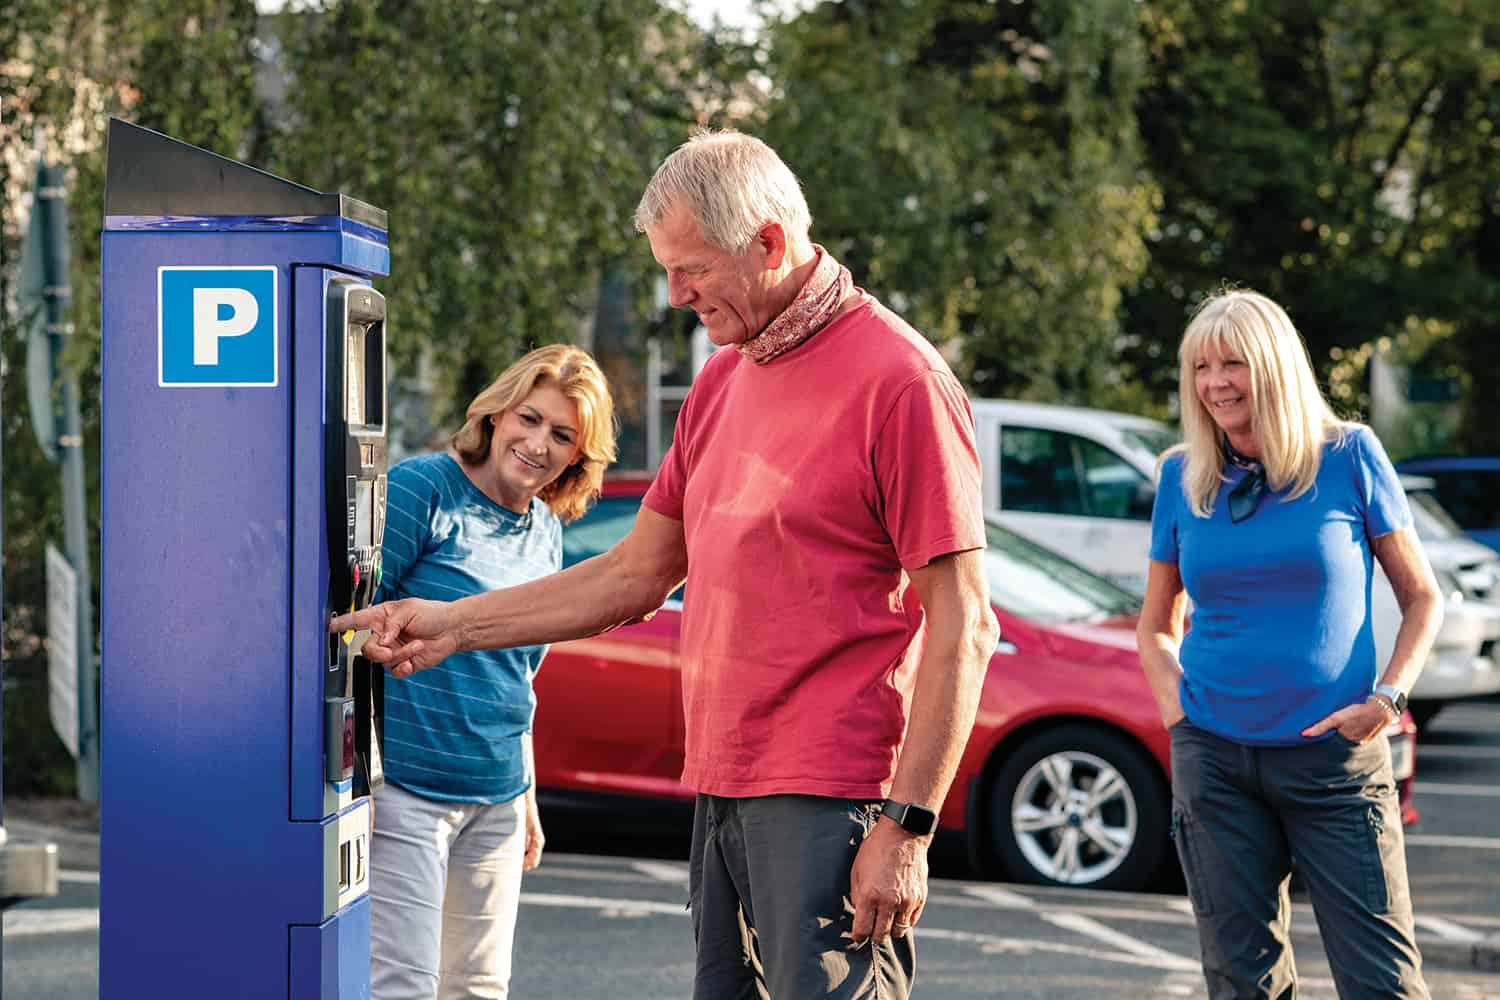 A man with his family using a ticket machine in a car park